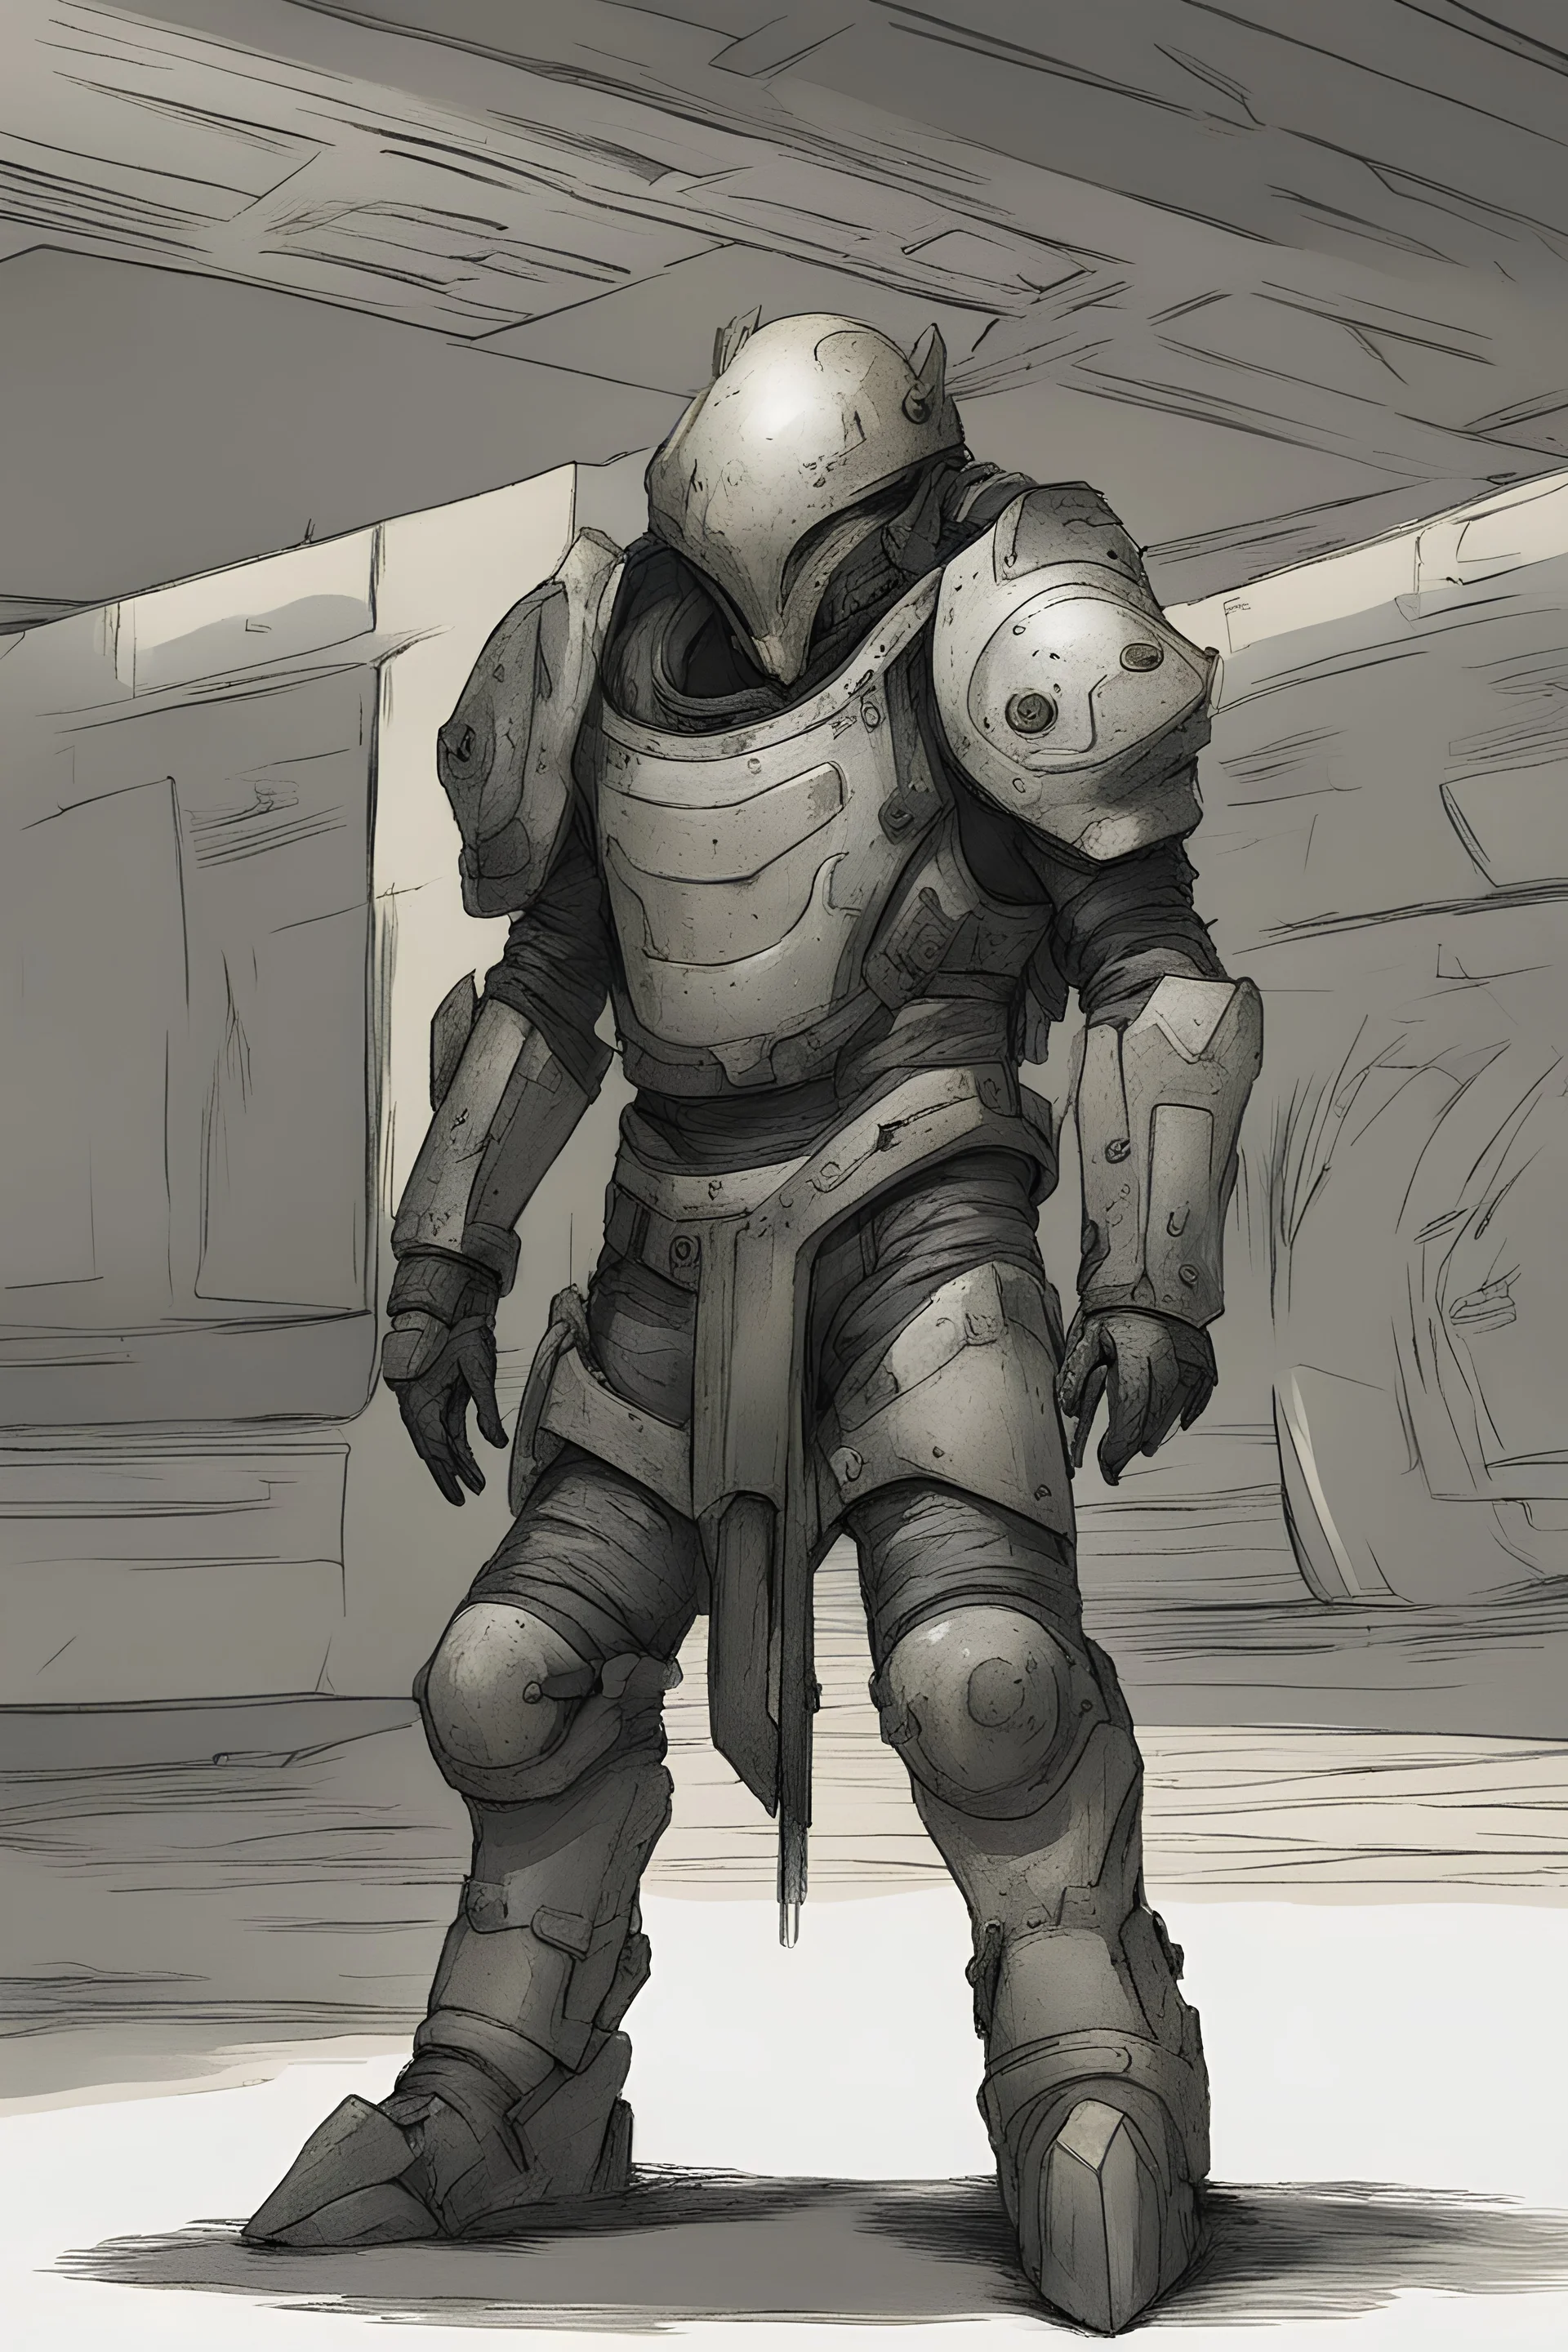 Outer space creature in an underground society wearing armor from dead humans